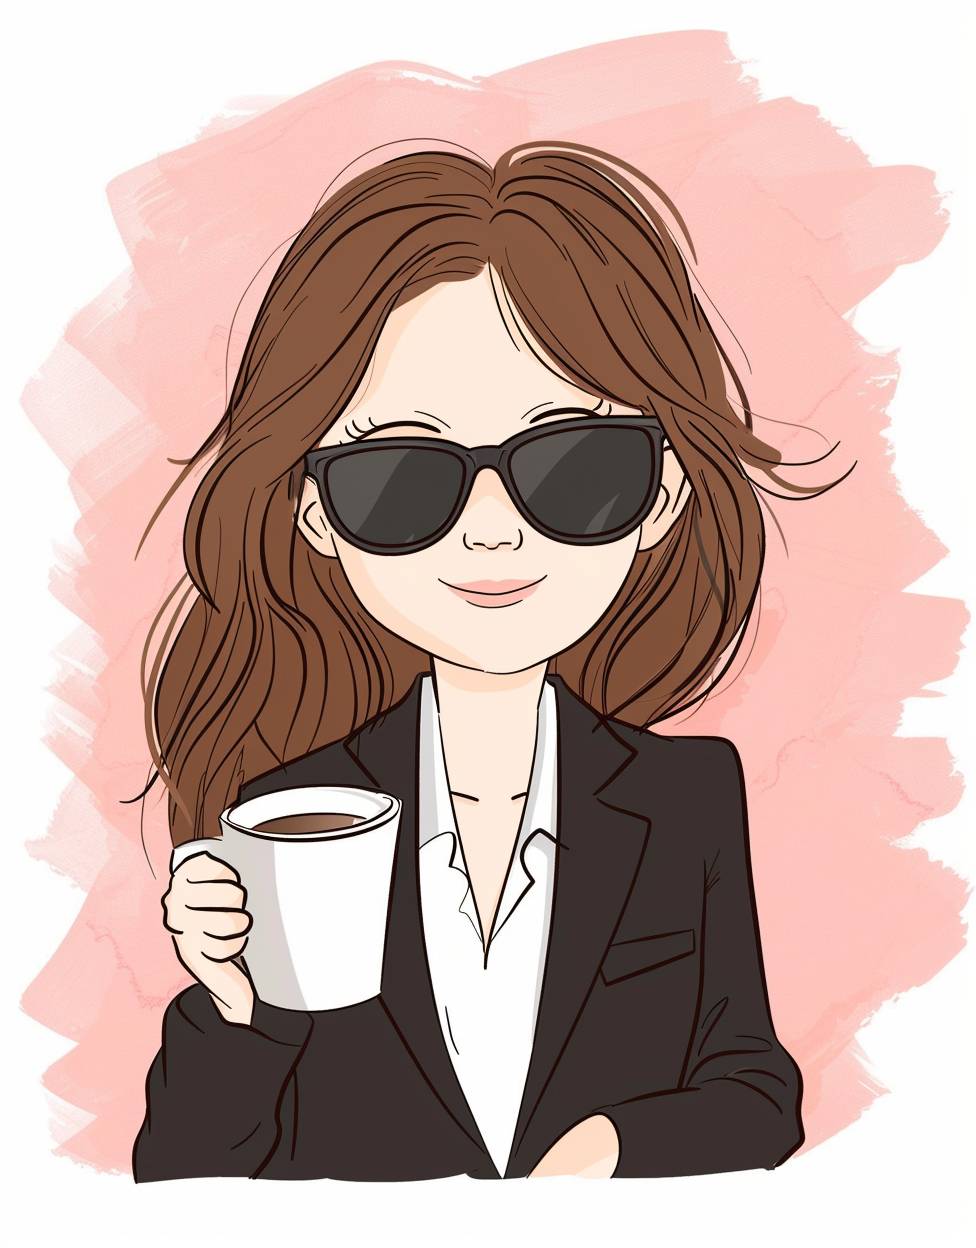 A cute female Asian lawyer with brown hair and pink, wearing sunglasses drinking coffee. She has an exaggerated expression while drinking tea. A simple cartoon style drawing with bright colors. The background color should be light red or pink, adding fun to the illustration. There is no other character in front of it, in the style of Quentin Blake.